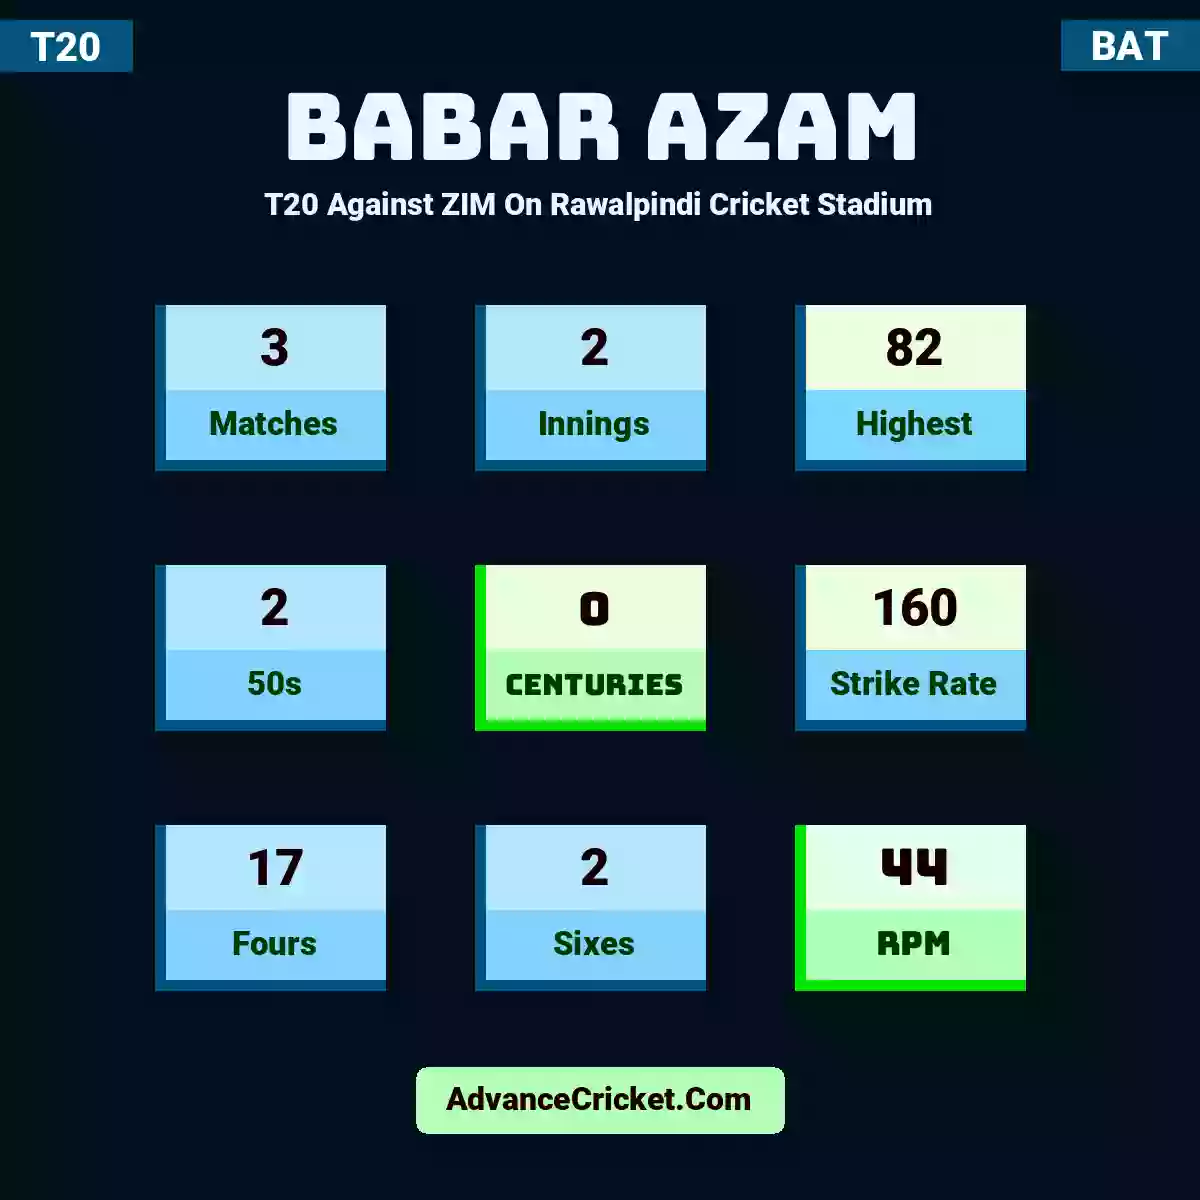 Babar Azam T20  Against ZIM On Rawalpindi Cricket Stadium, Babar Azam played 3 matches, scored 82 runs as highest, 2 half-centuries, and 0 centuries, with a strike rate of 160. B.Azam hit 17 fours and 2 sixes, with an RPM of 44.